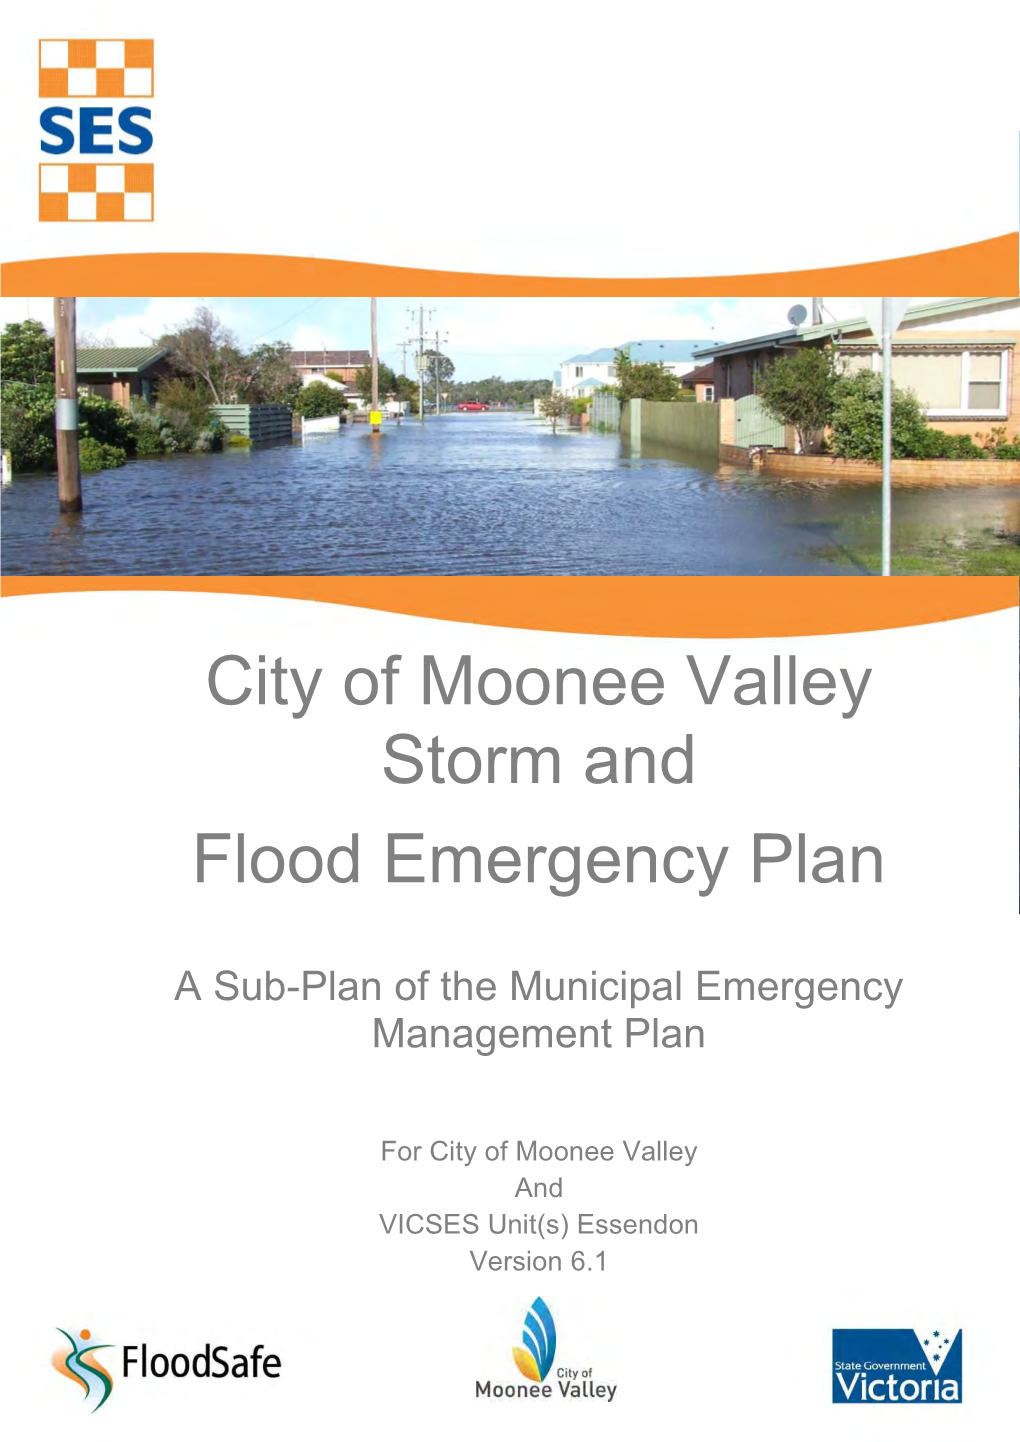 City of Moonee Valley Storm and Flood Emergency Plan